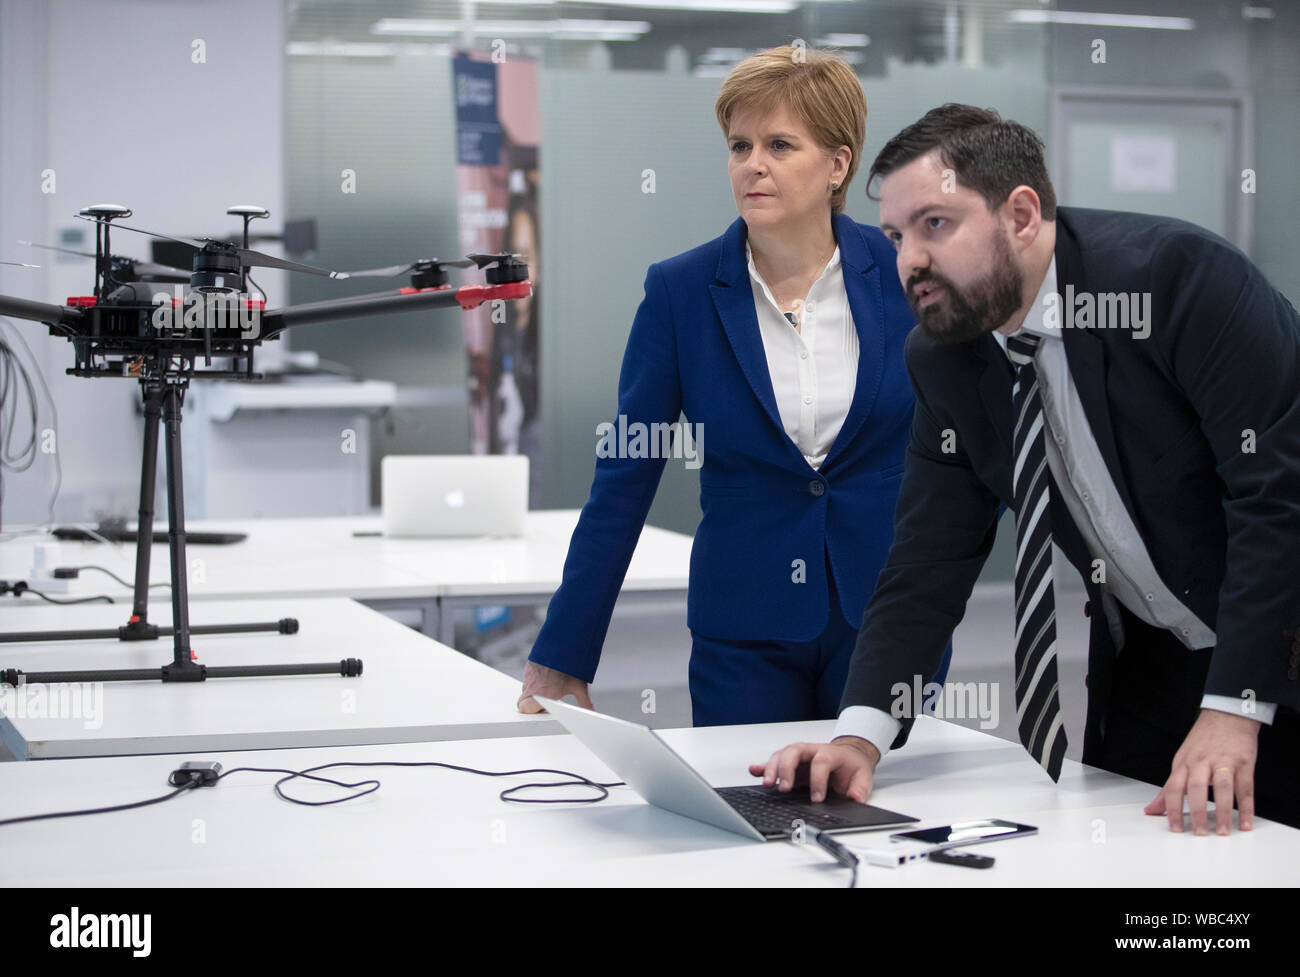 First Minister of Scotland Nicola Sturgeon meets PhD student John Pedro Battistella Nadas during a visit to the School of Engineering at the University of Glasgow, where the Scottish Government unveiled a new 5G plan. Stock Photo